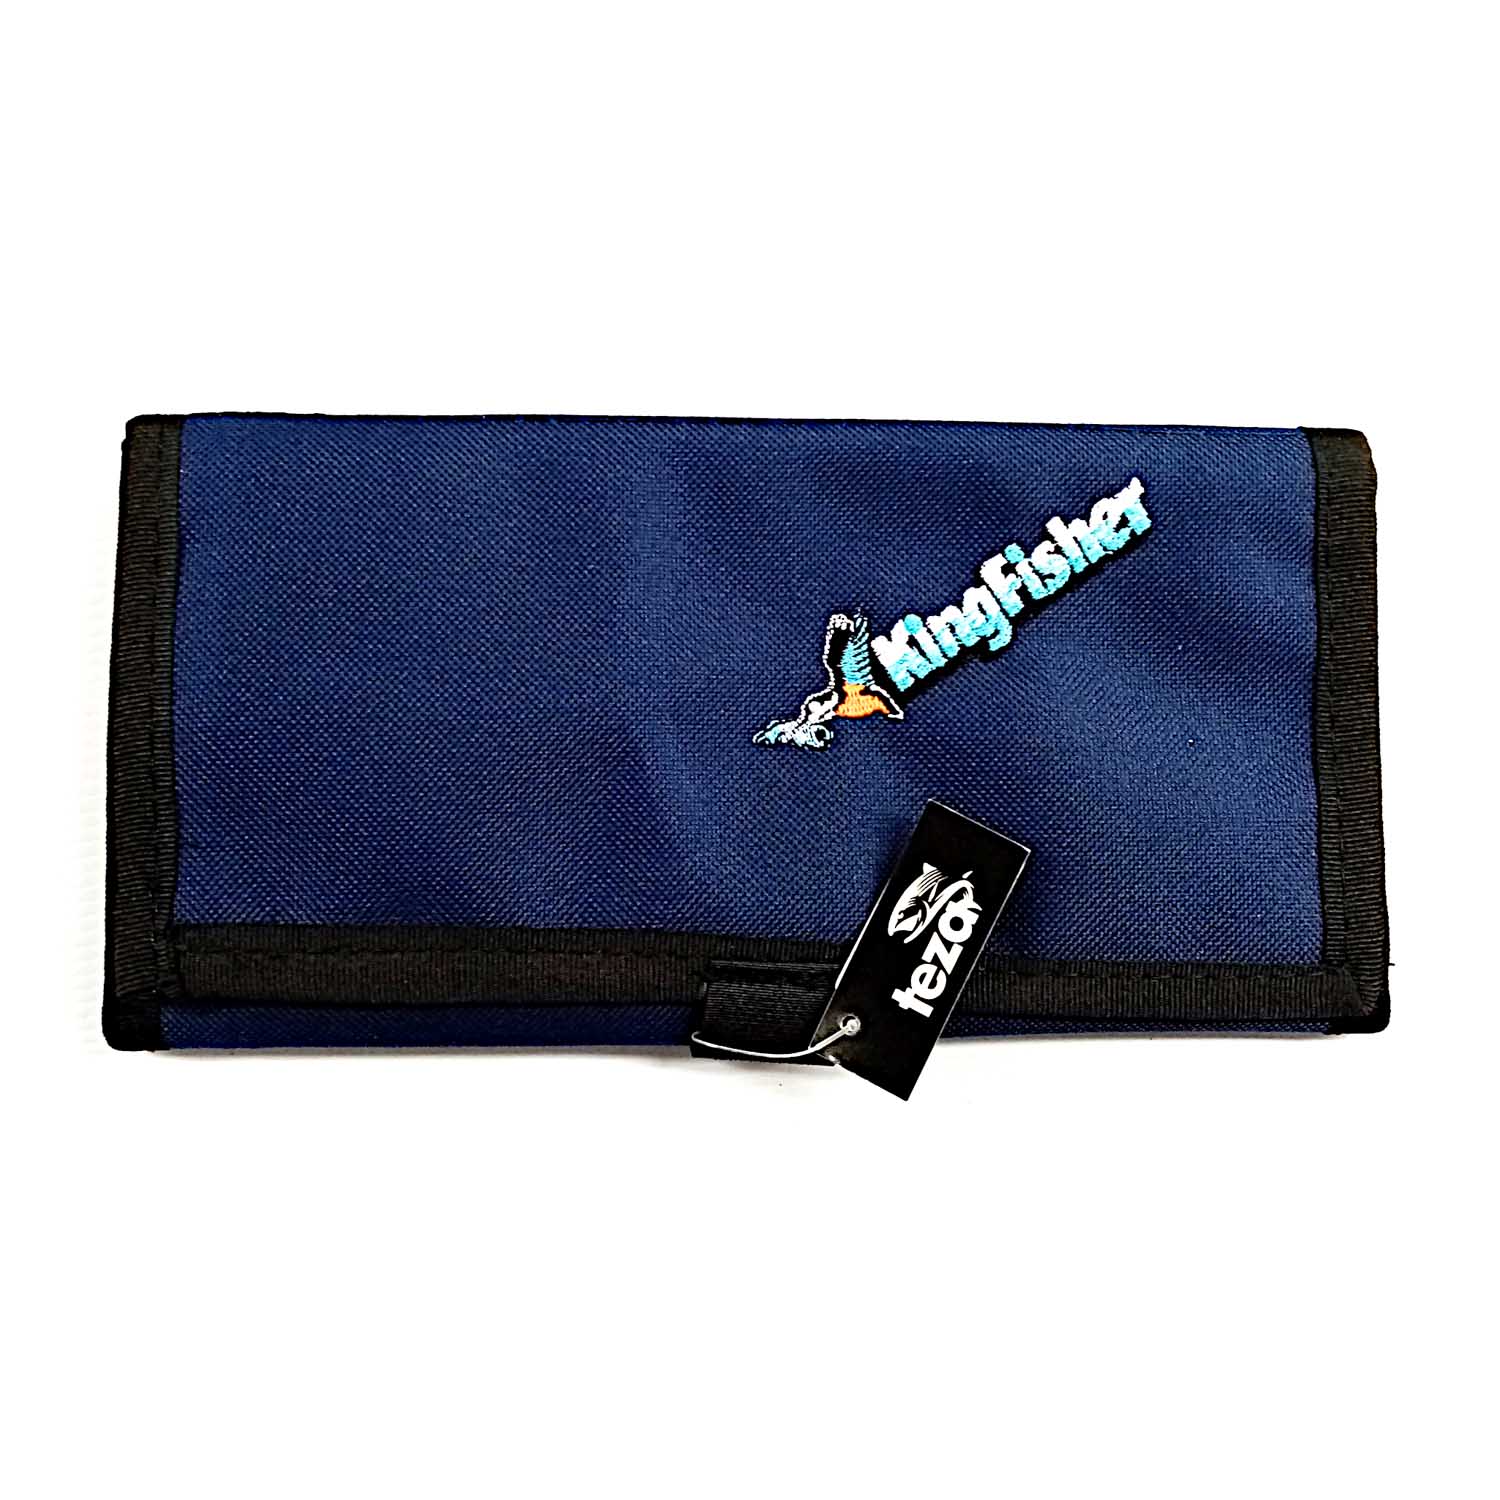 Kingfisher Trace Pouch Medium - Showspace